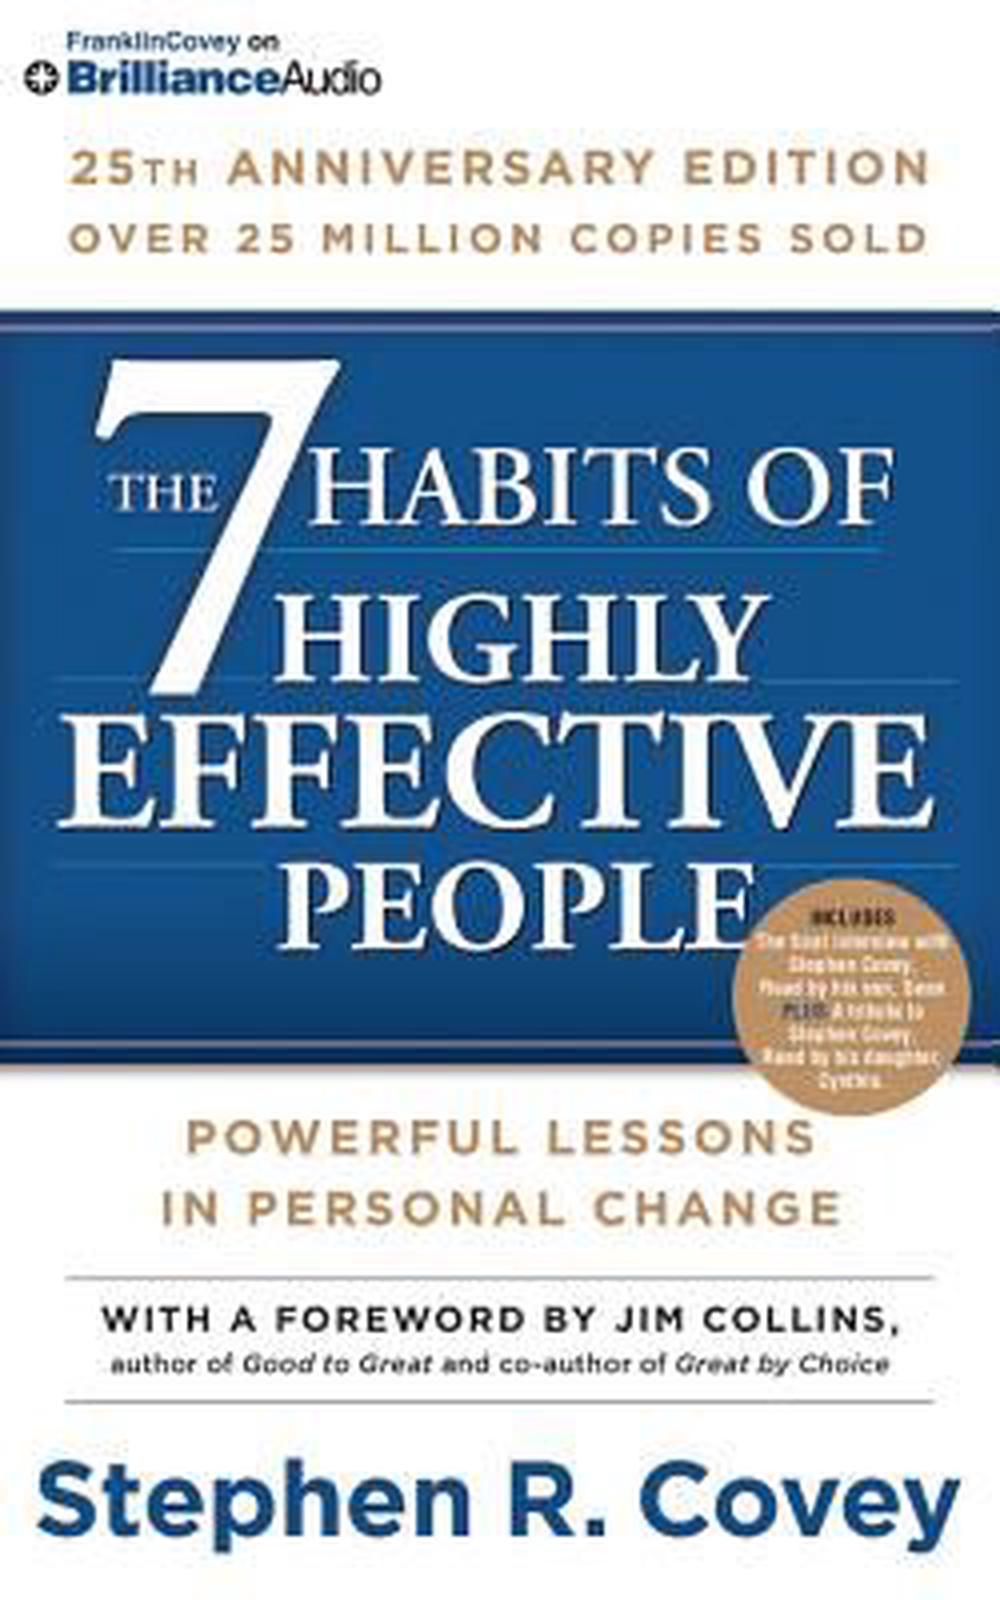 the 7 habits of highly effective people by stephen r